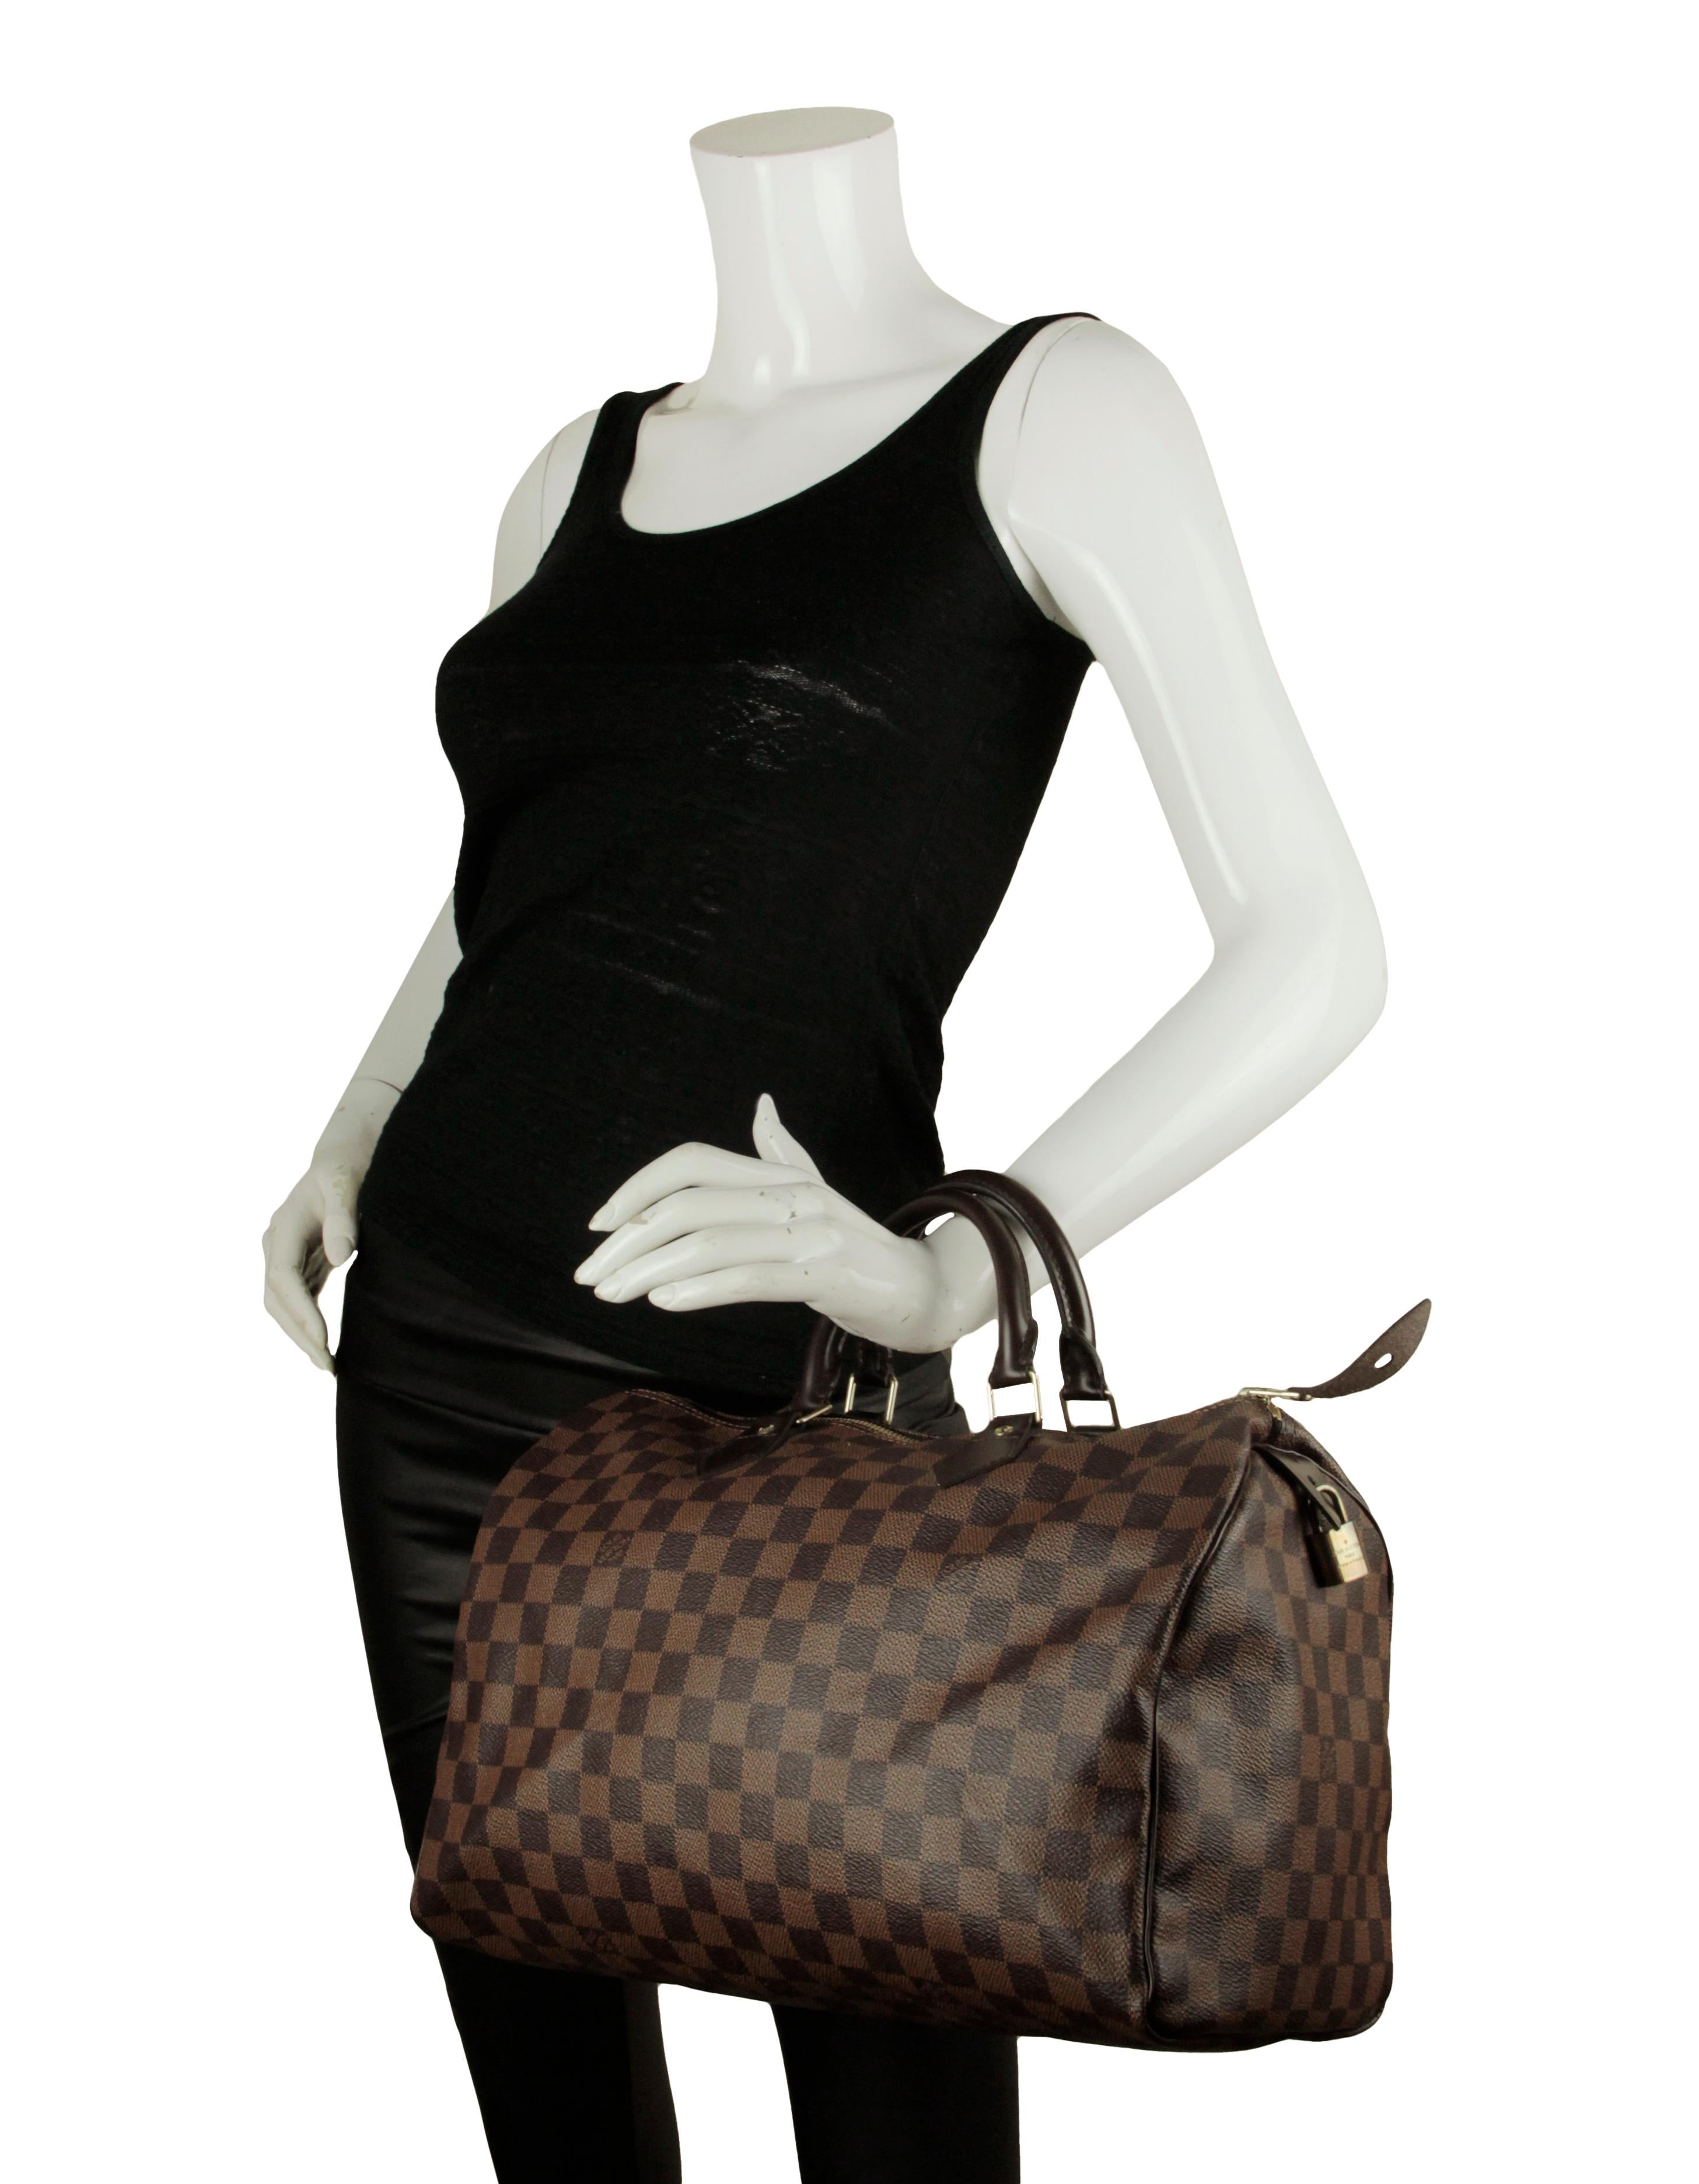 Louis Vuitton Coated Canvas Damier Ebene Speedy 35 Bag

Made In: France
Year of Production: 2008
Color: Brown
Hardware: Goldtone hardware
Materials: Coated canvas, brown leather trim
Lining: Red textile lining
Closure/Opening: Top zip
Exterior